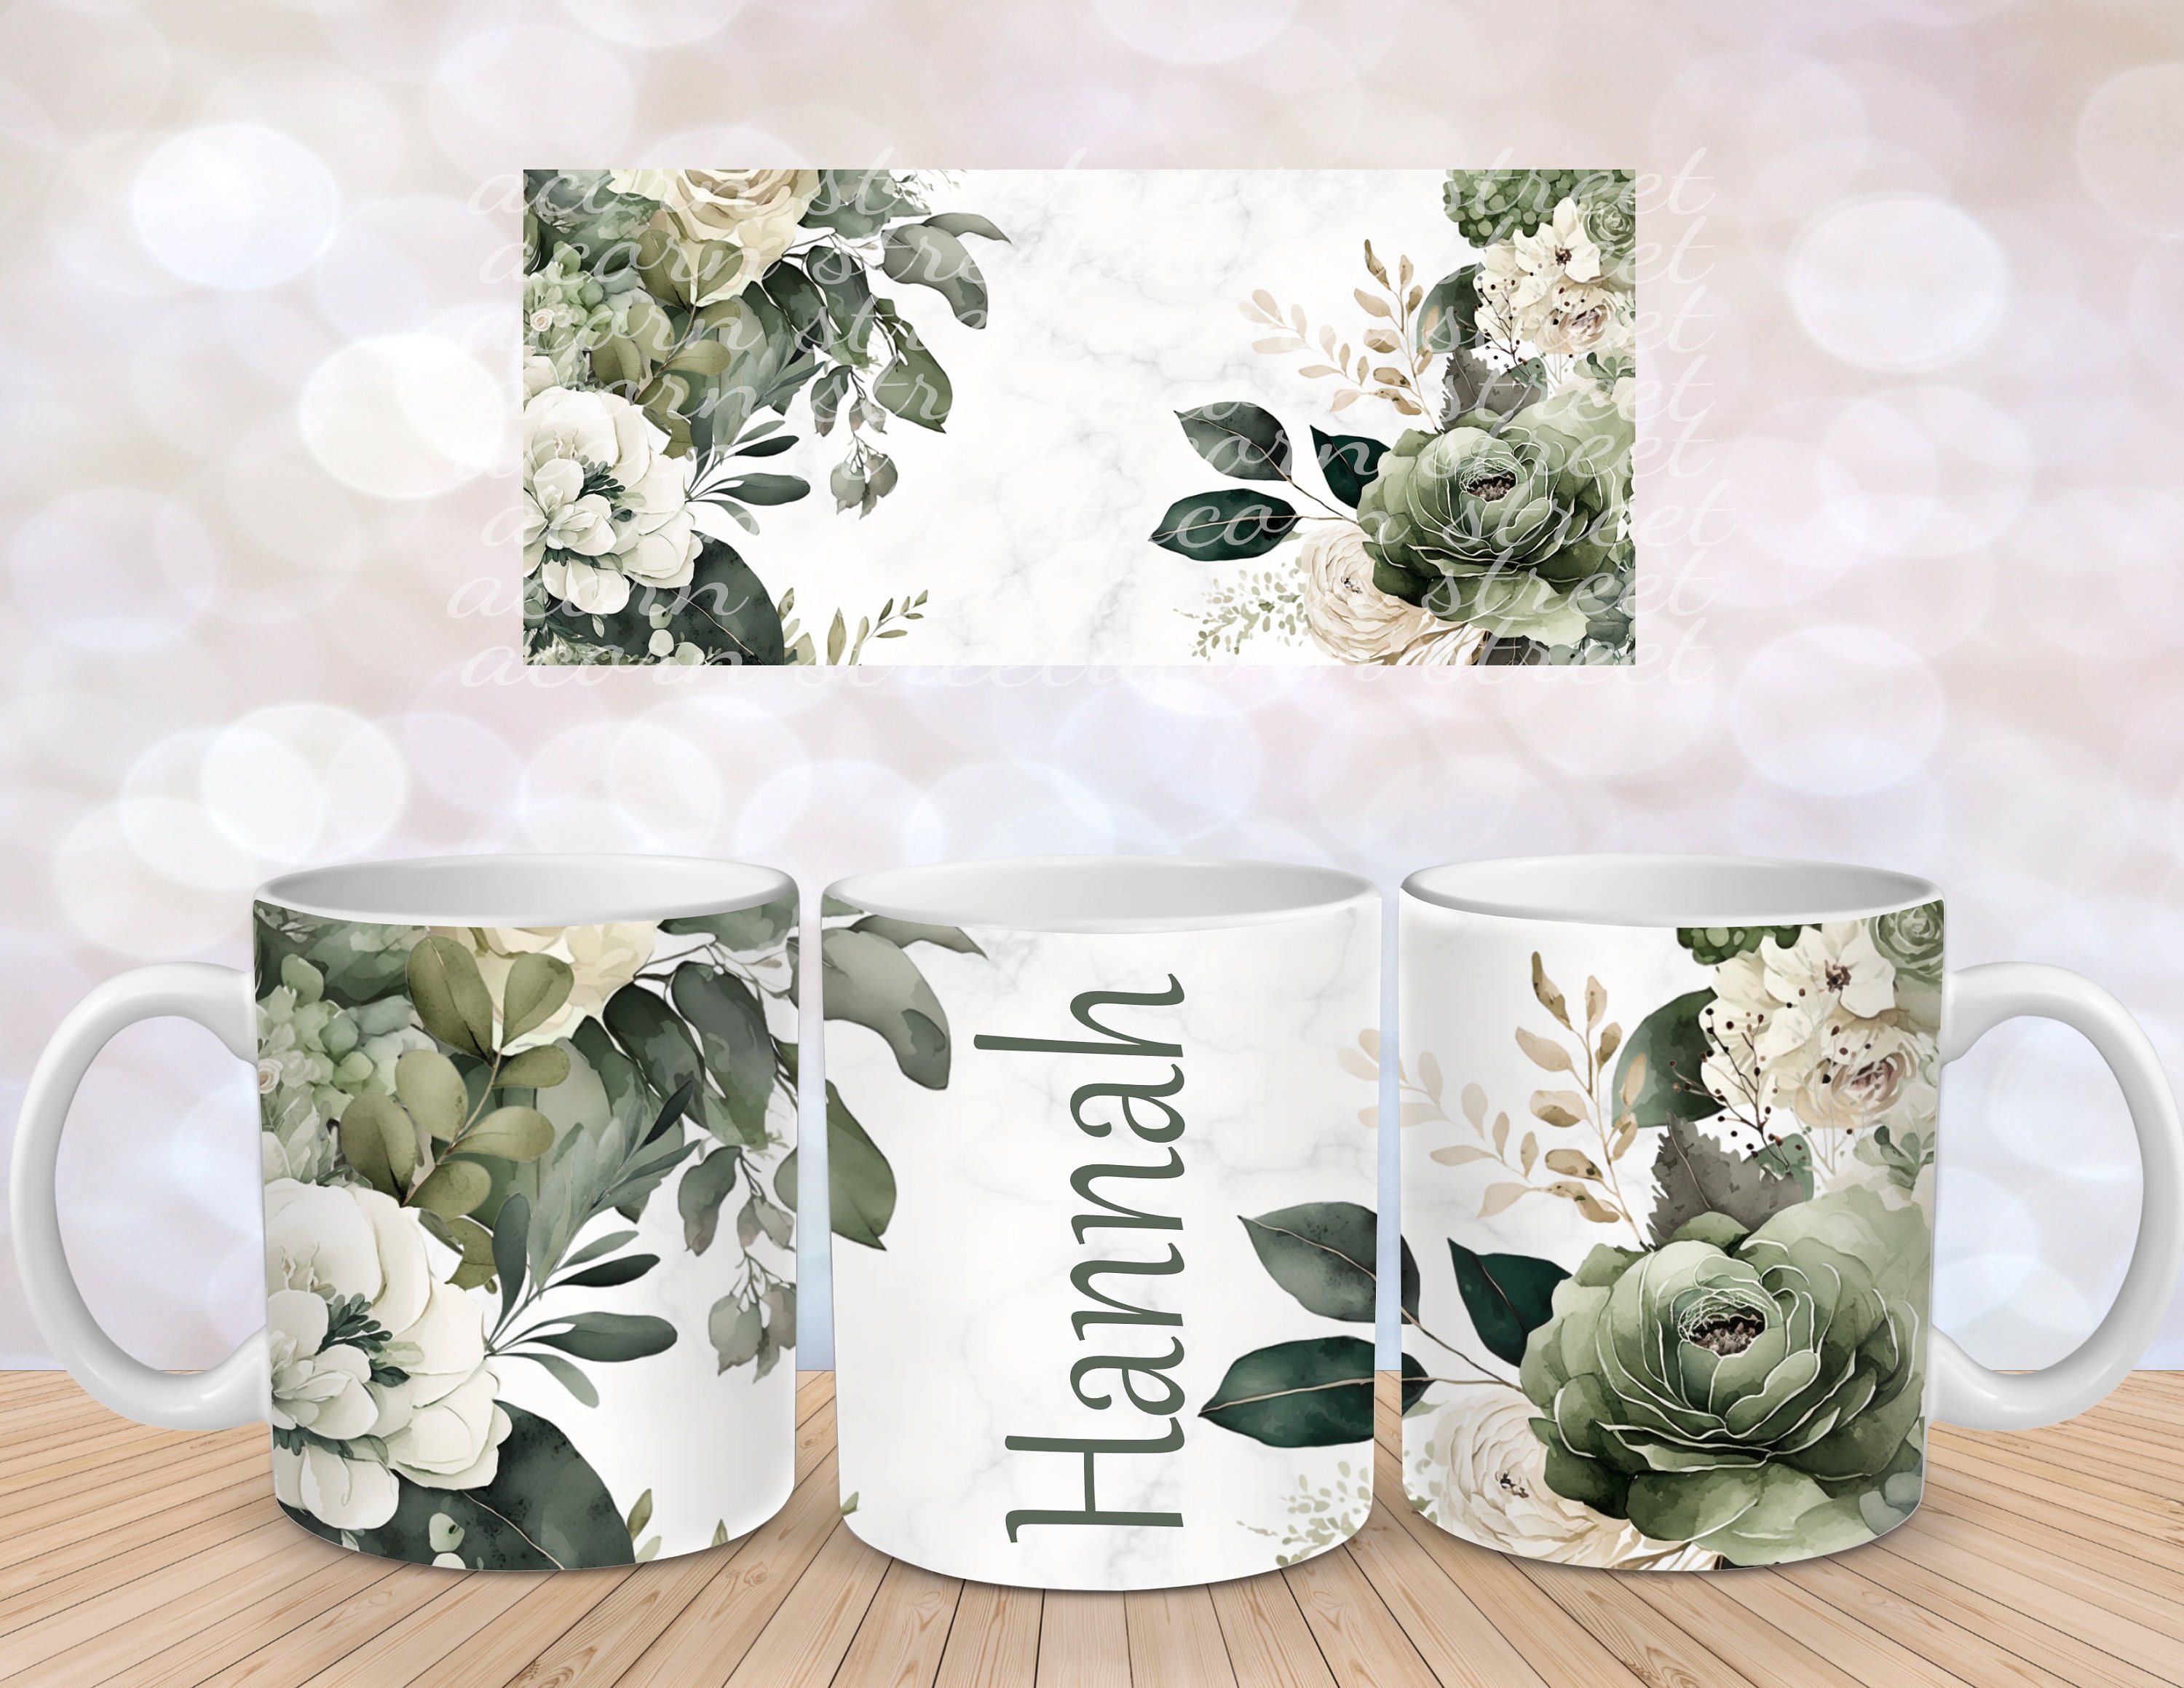 Ceramic Small Fresh Flower Mug With Plate Cover Cups of Coffee Travel Mug  Beer Thermal Cups for Coffee Cup to Go Drinkware Mugs